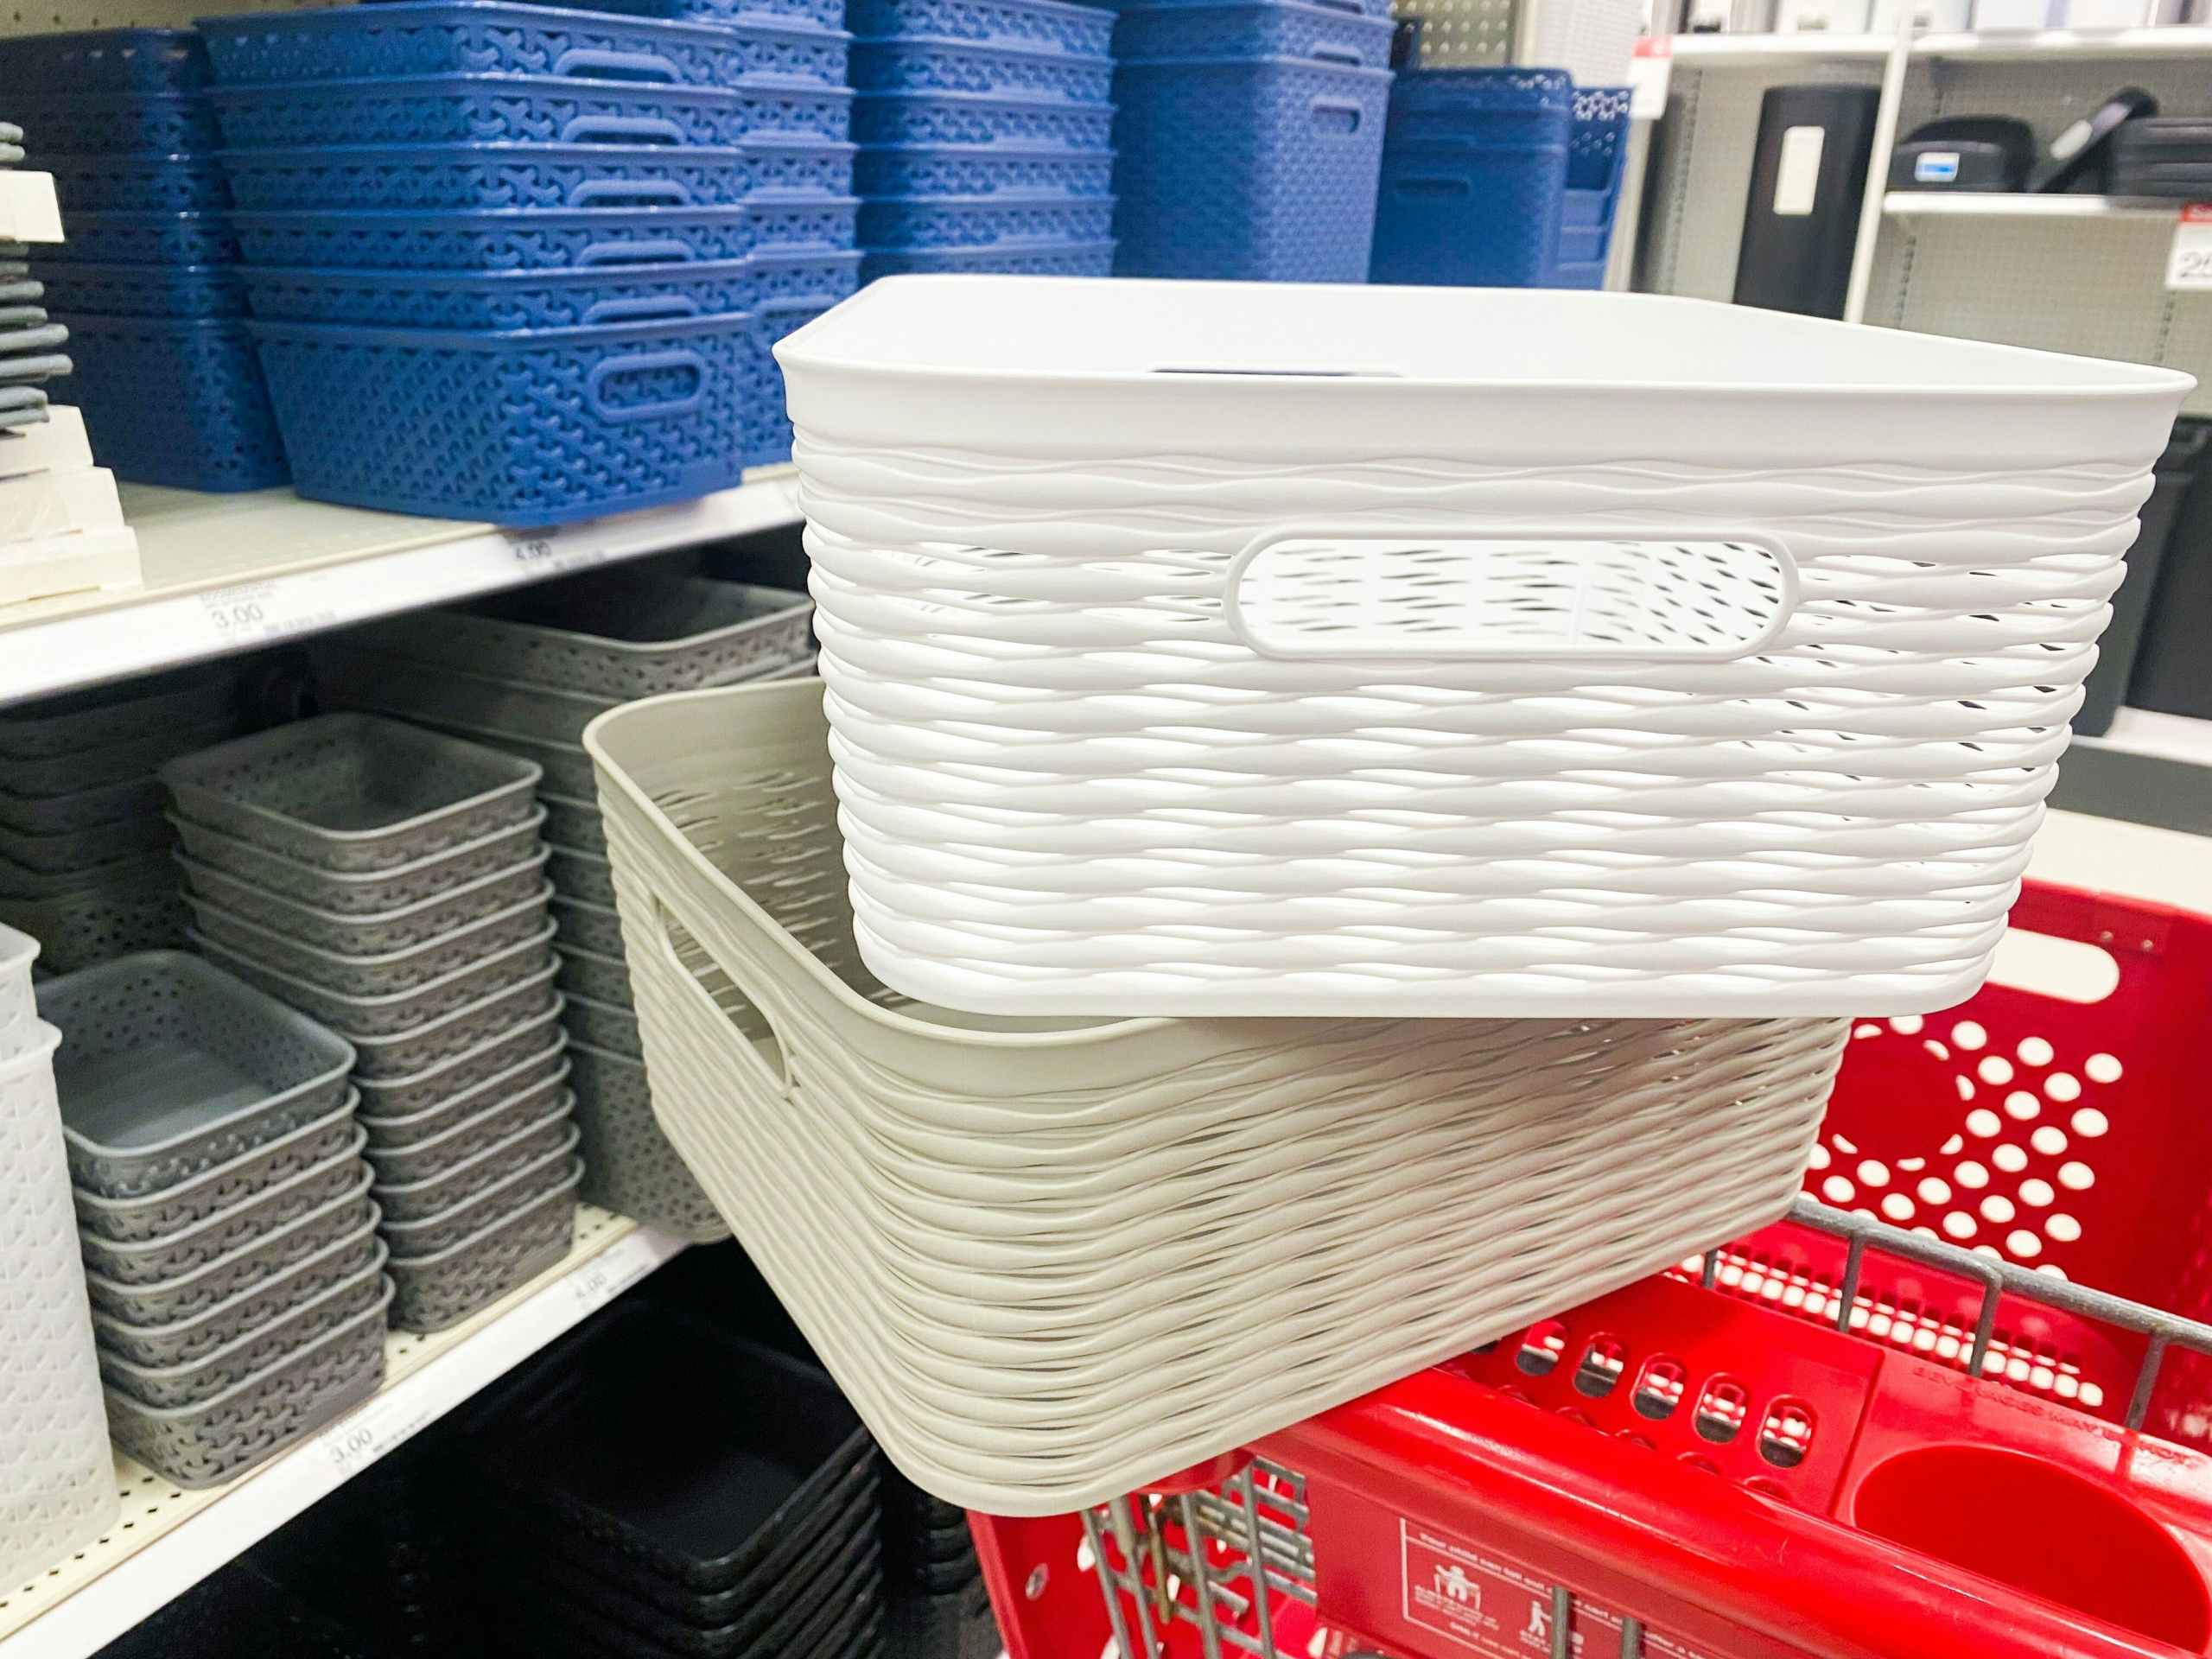 Two decorative storage baskets sitting in a Target shopping cart next to other decorative storage items